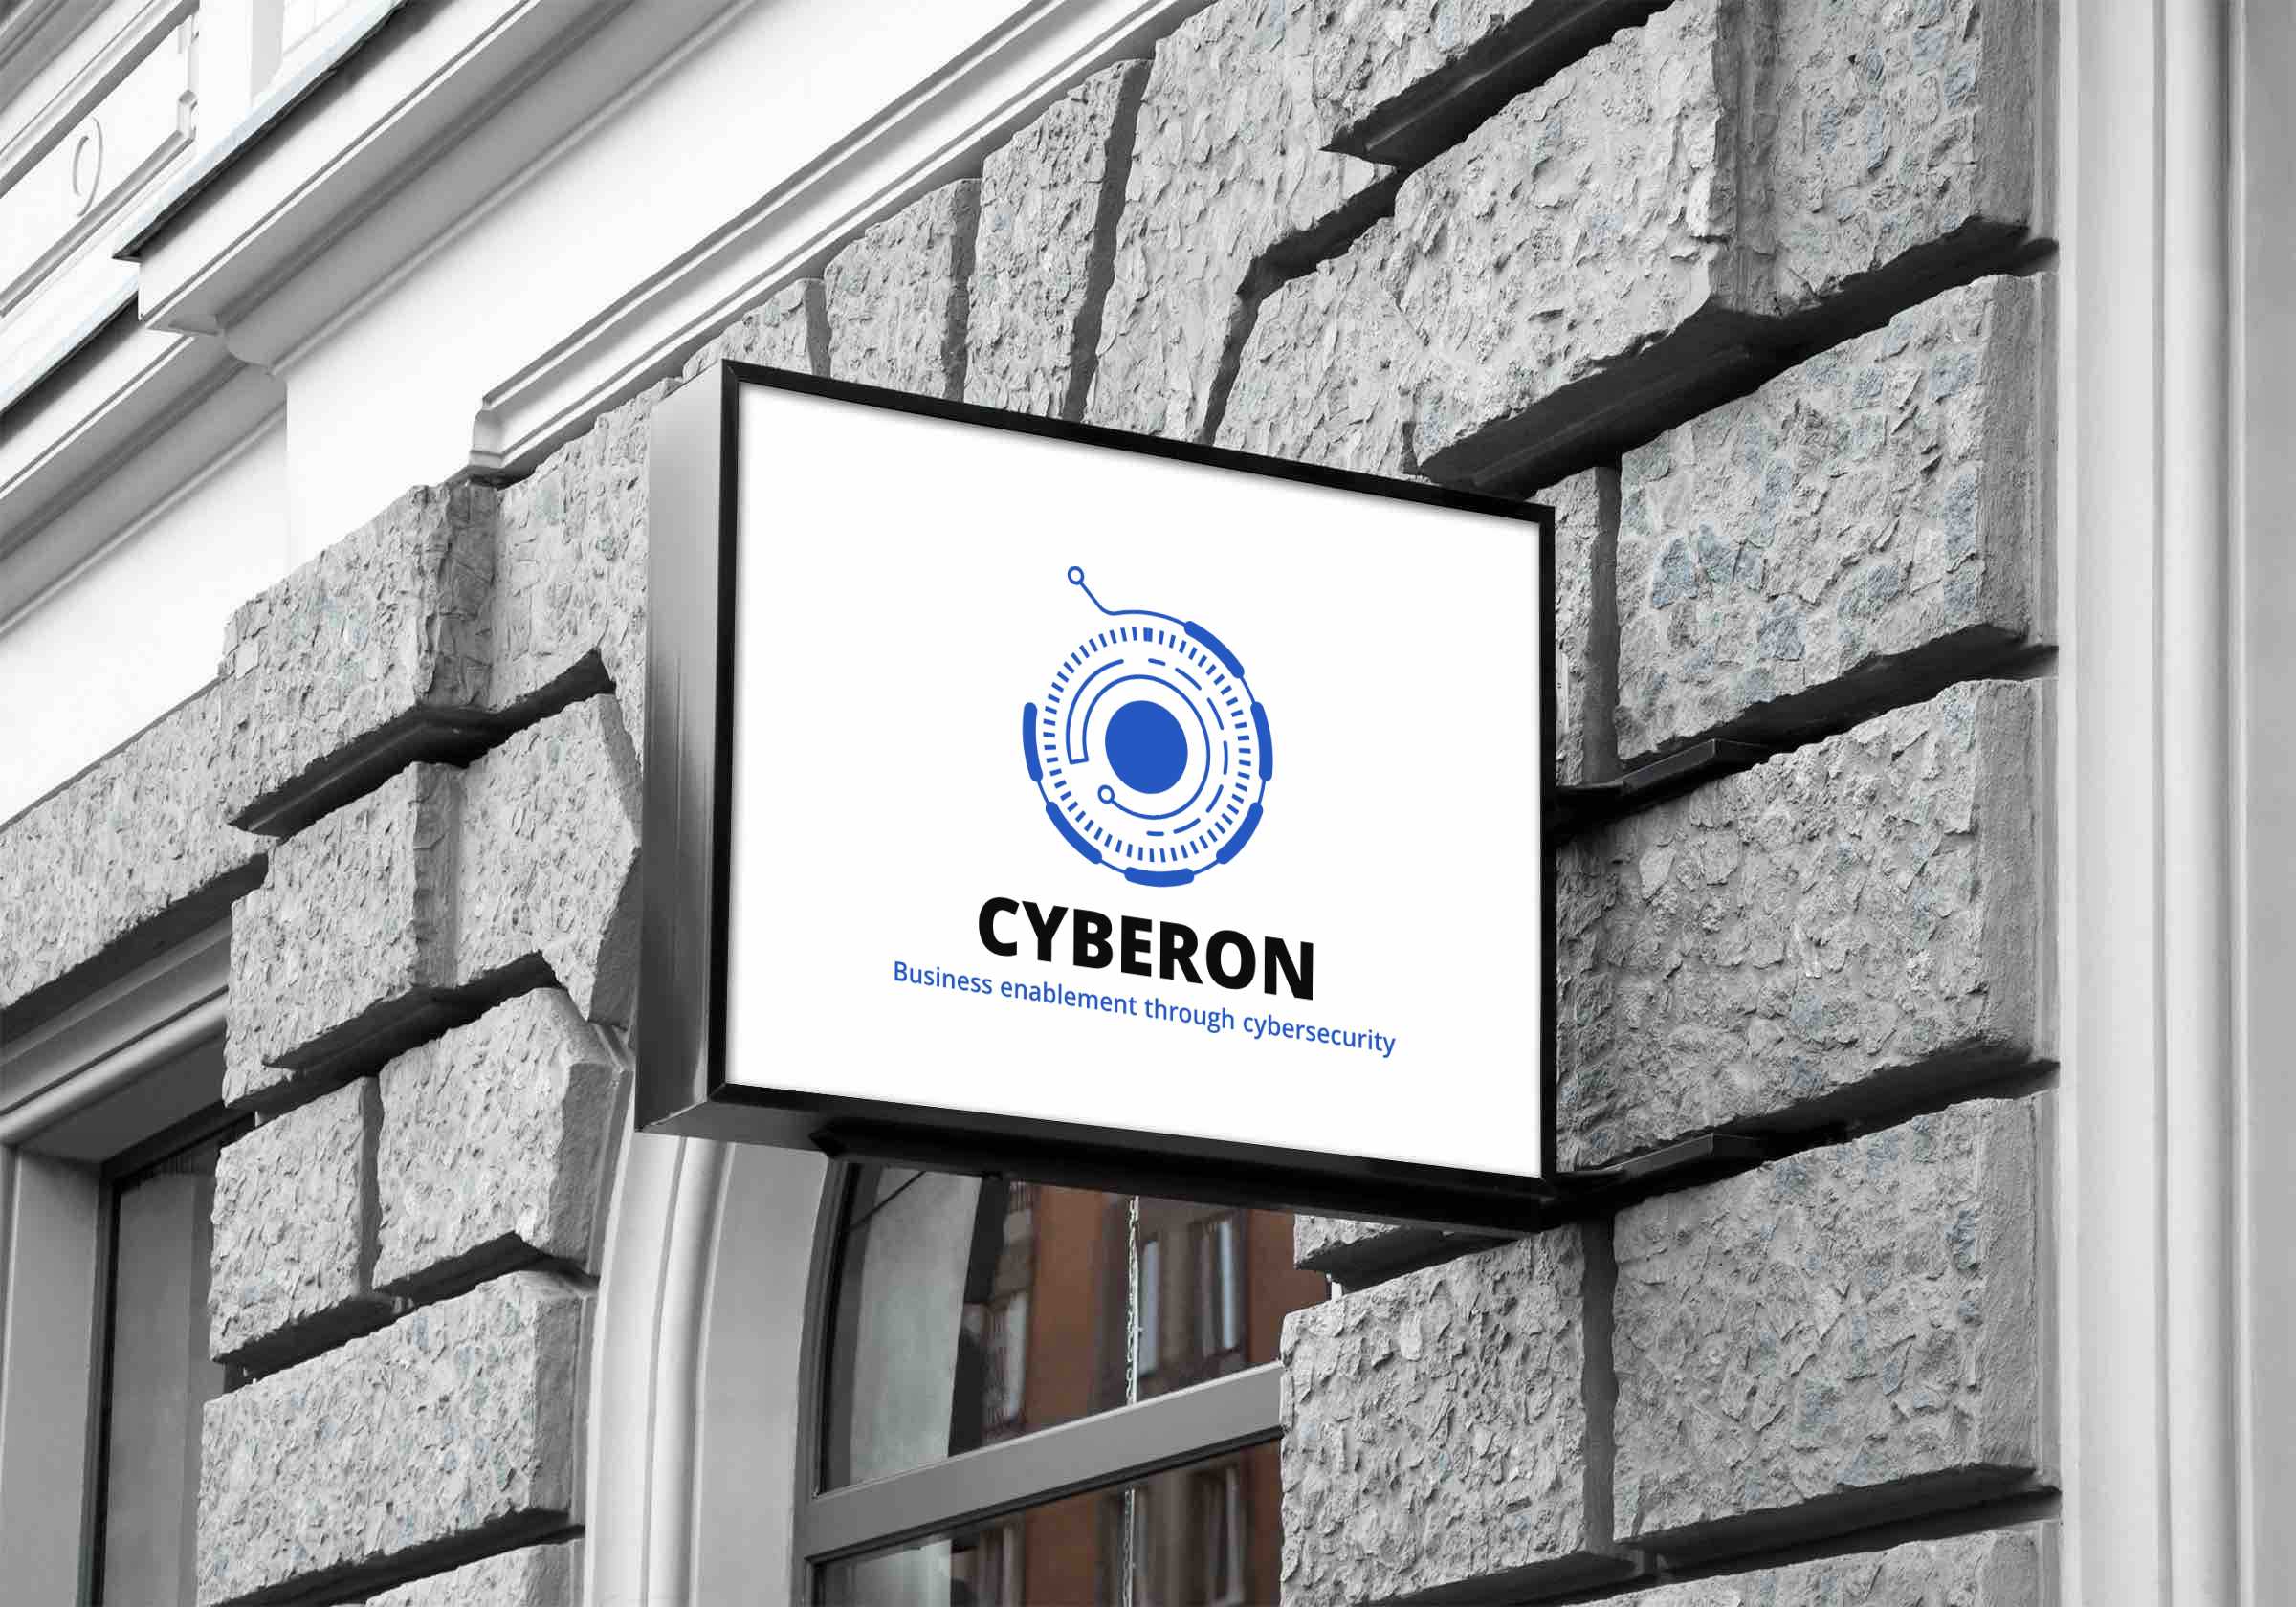 The Cyberon sign on a grey brick wall